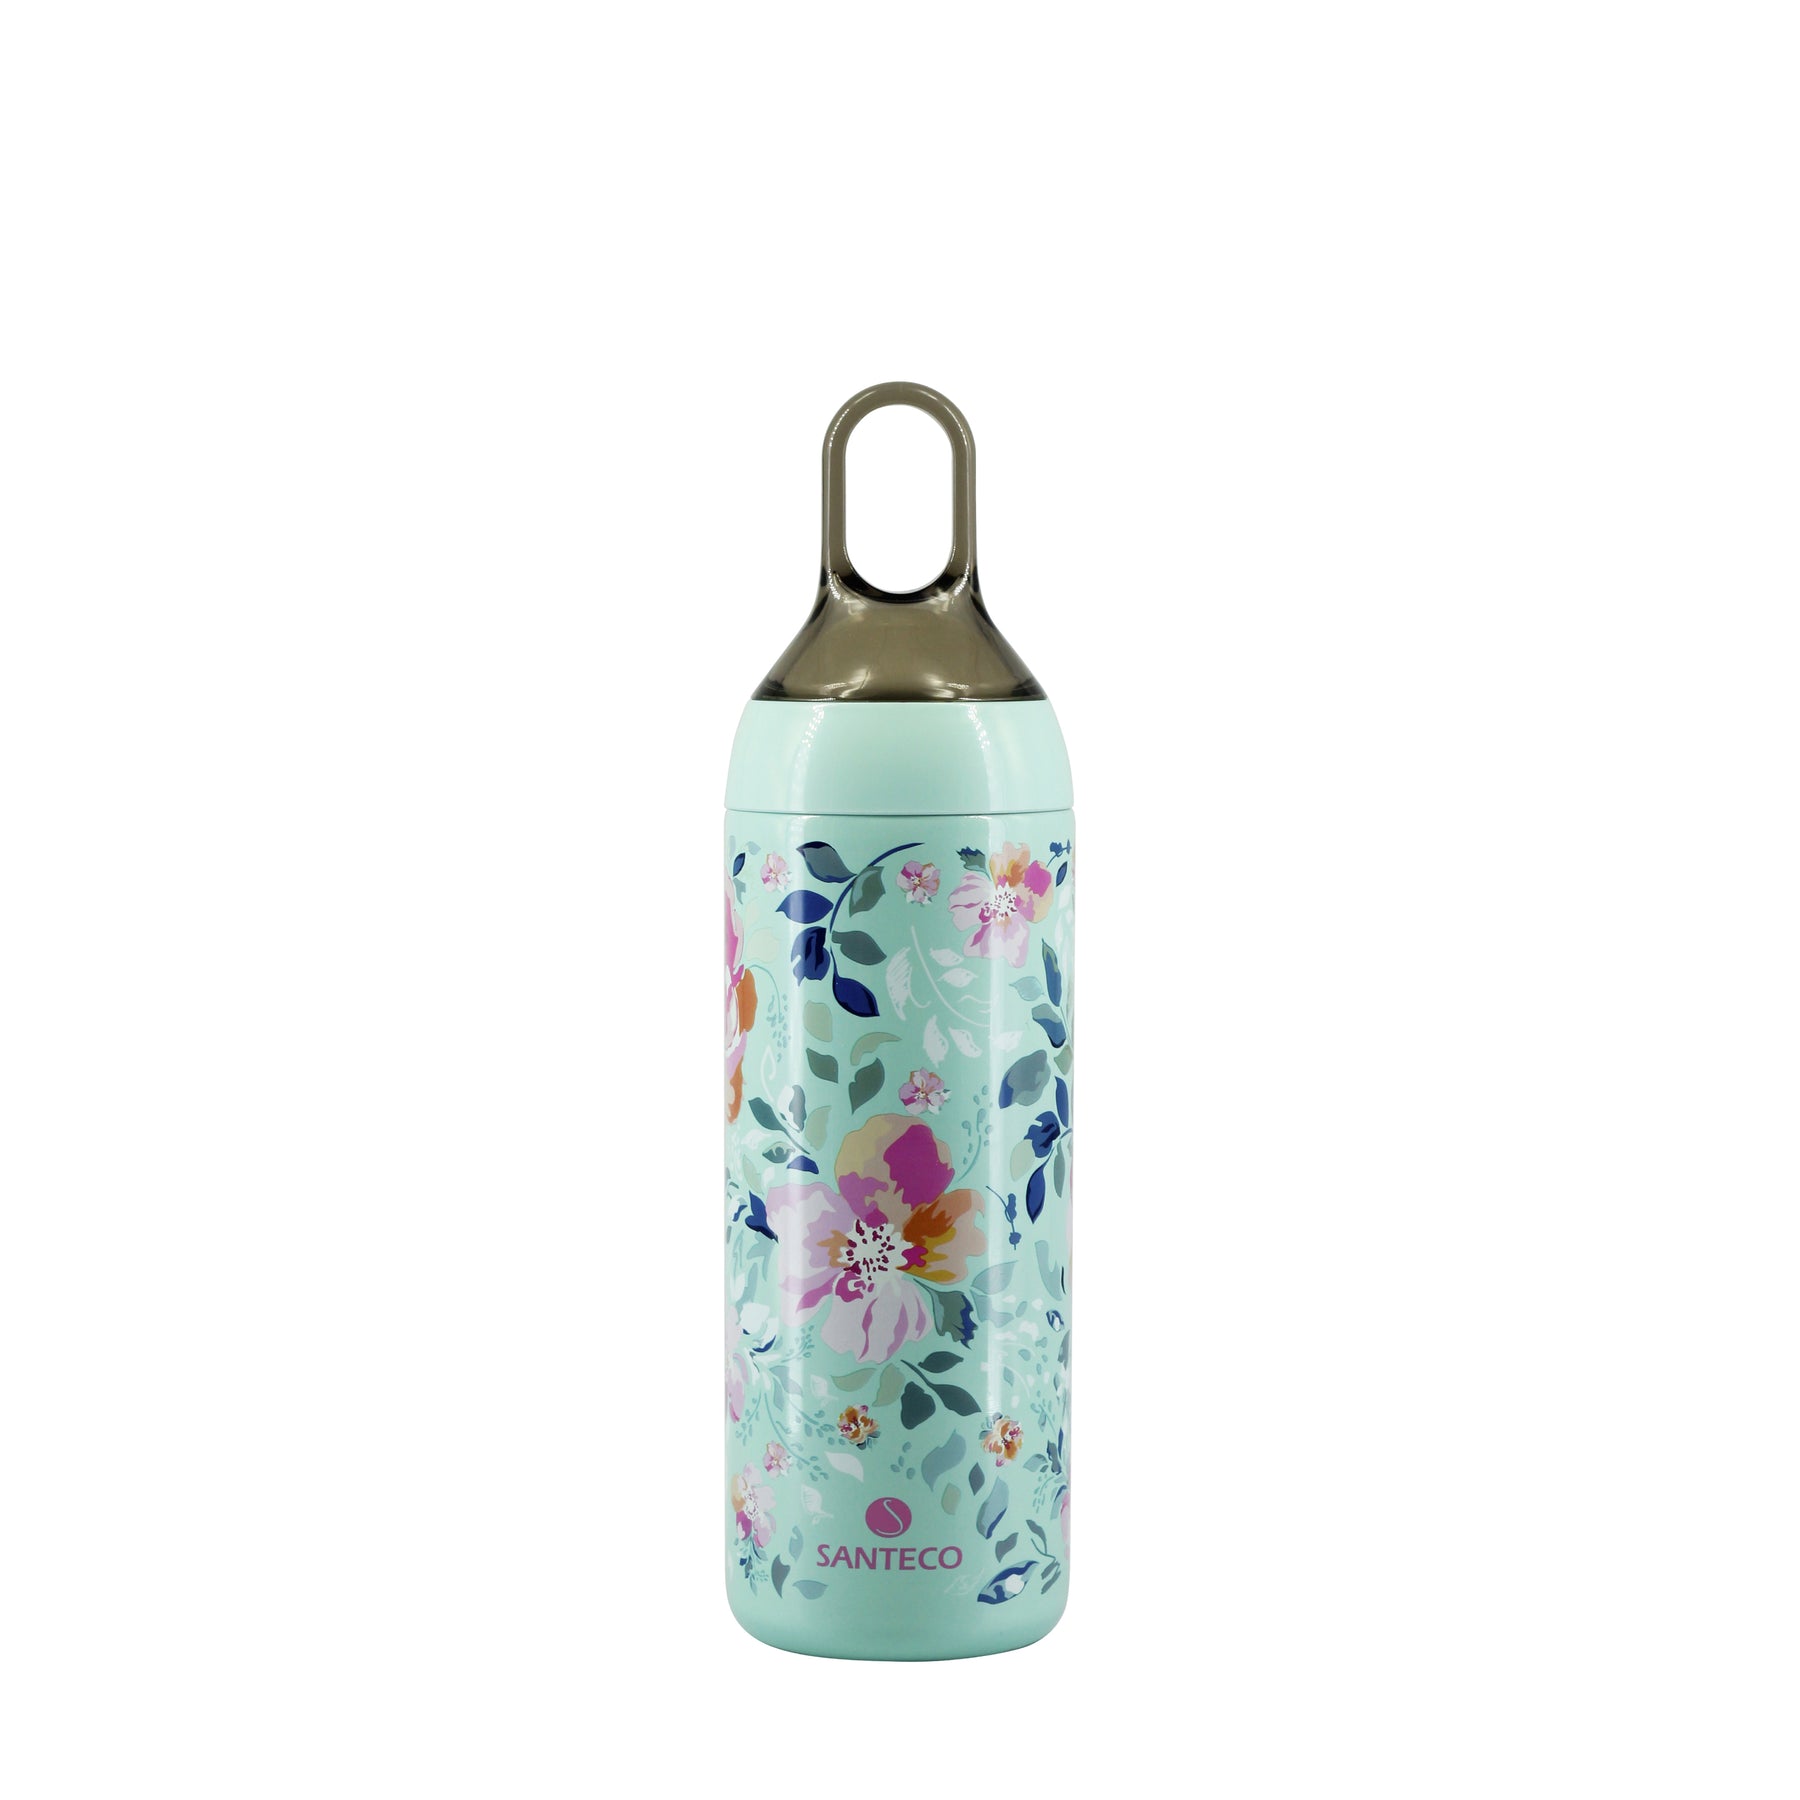 SANTECO Yoga Art Series Thermal Bottle, 17 oz, Stainless Steel, Vacuum Insulated